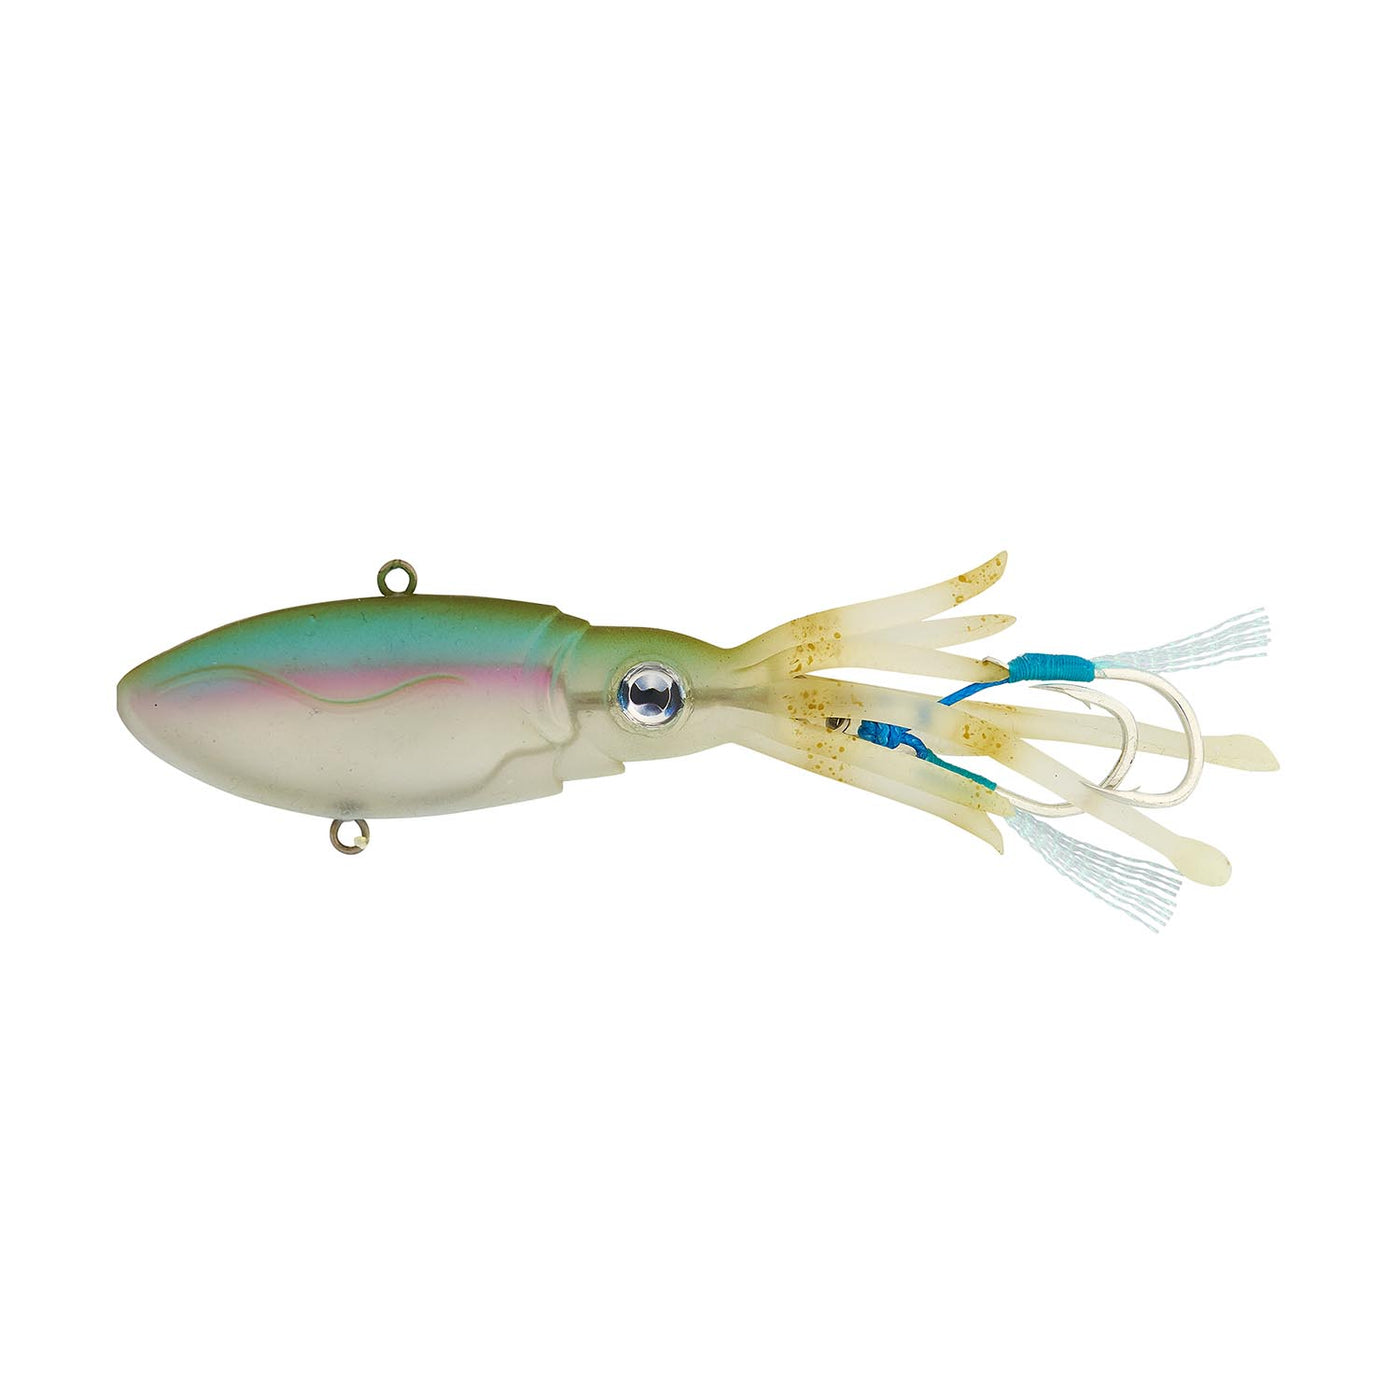 Nomad Squidtrex 110 Vibe - 110mm 52gm - Compleat Angler Nedlands Pro Tackle